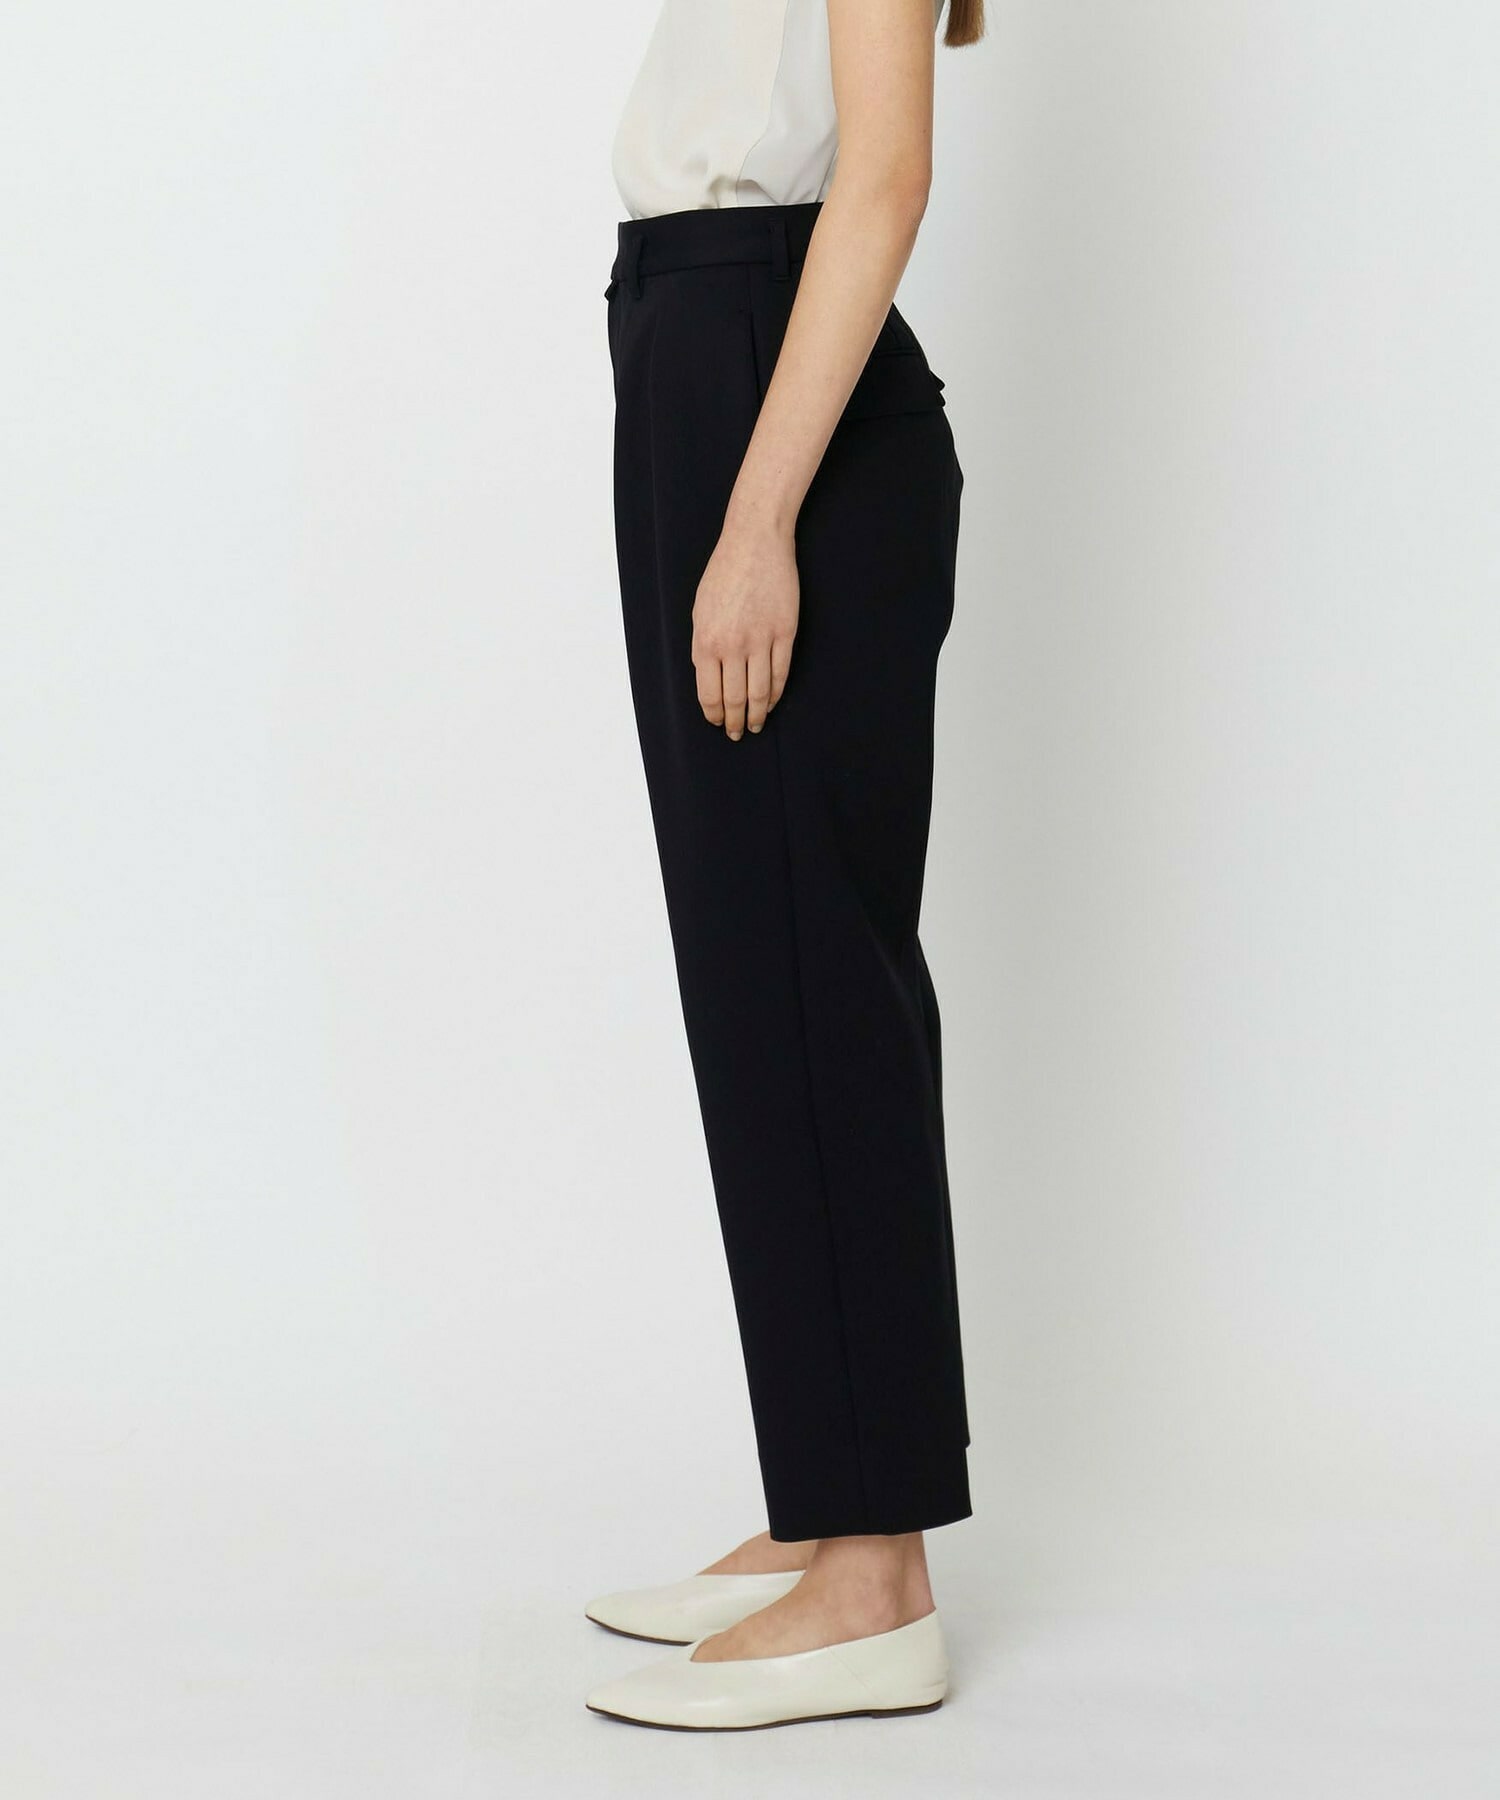 【yoshie inaba】RECYCLE NYLON DOUBLE PLEATED TAPERED  PANTS 詳細画像 ブラック 3